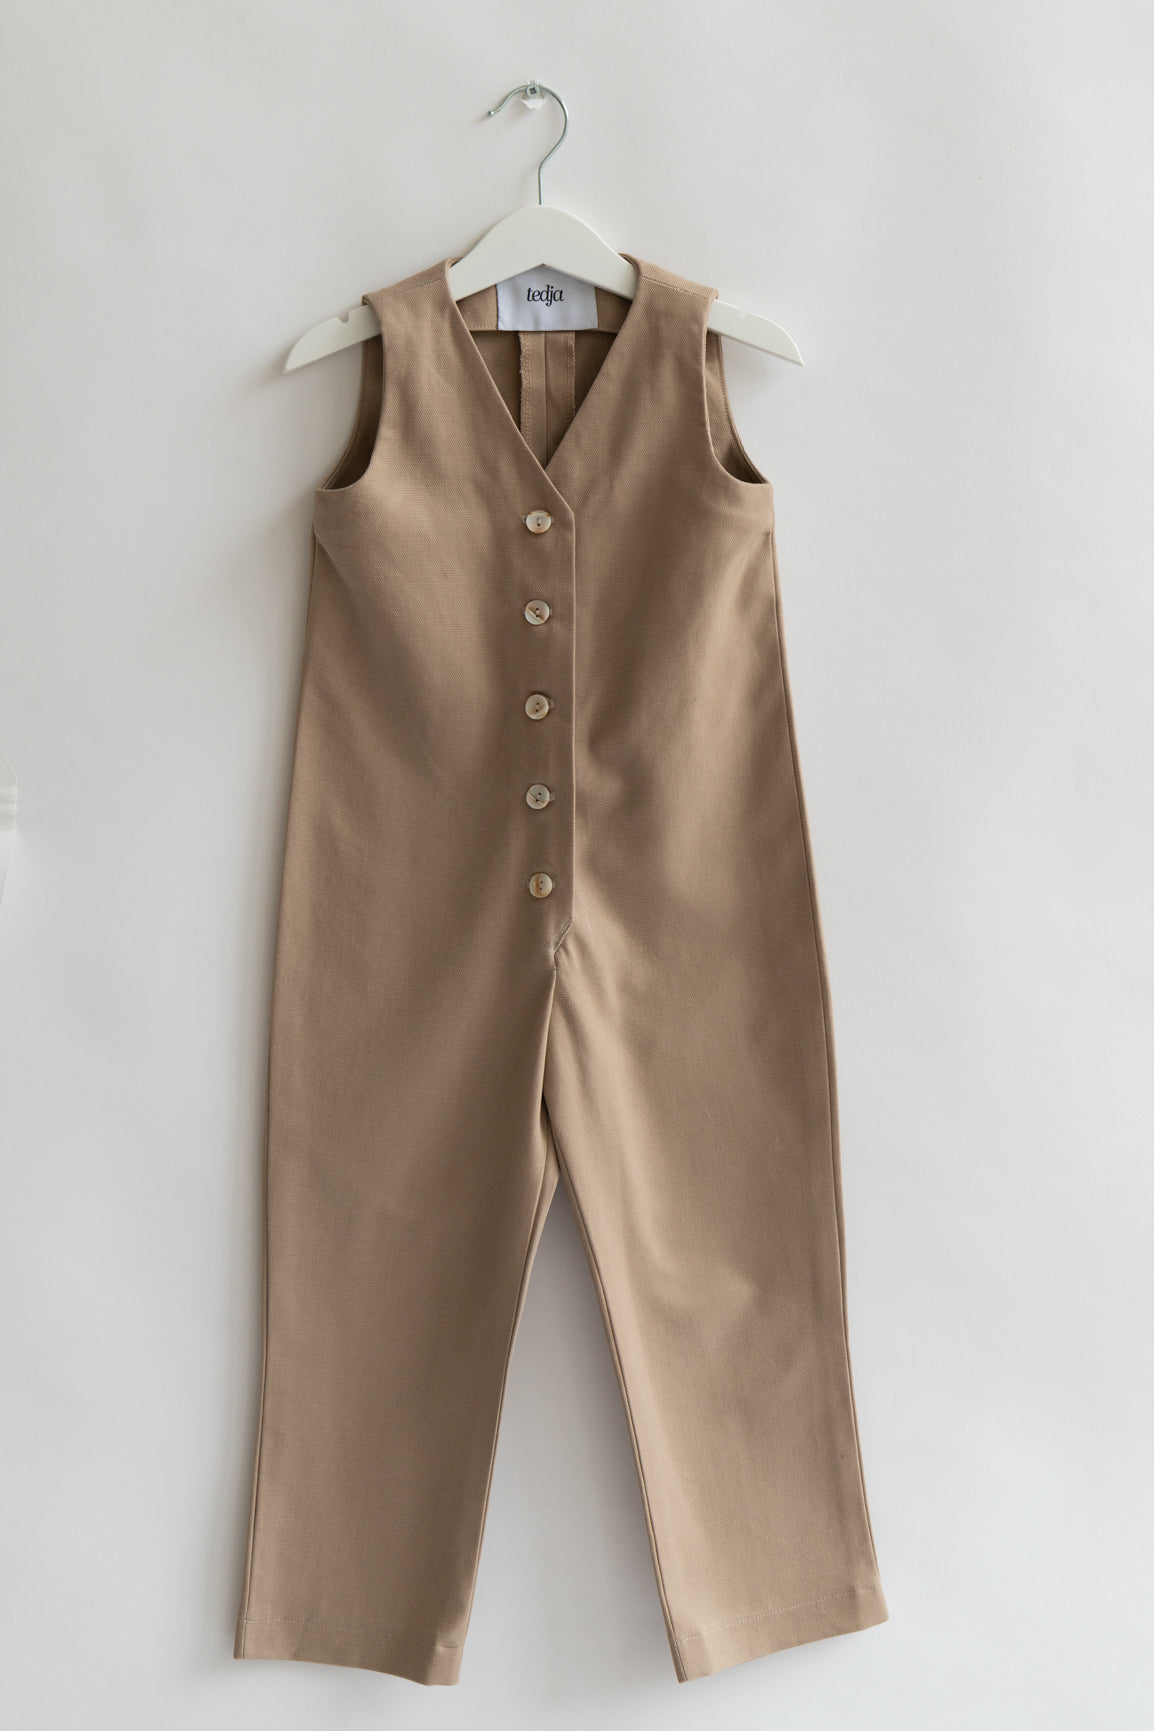 Beige Oatmeal color Kids Mini Jumpsuit overall workwear cotton canvas with pockets 5 buttons v-neck OEKO-TEX sustainable clothes handmade